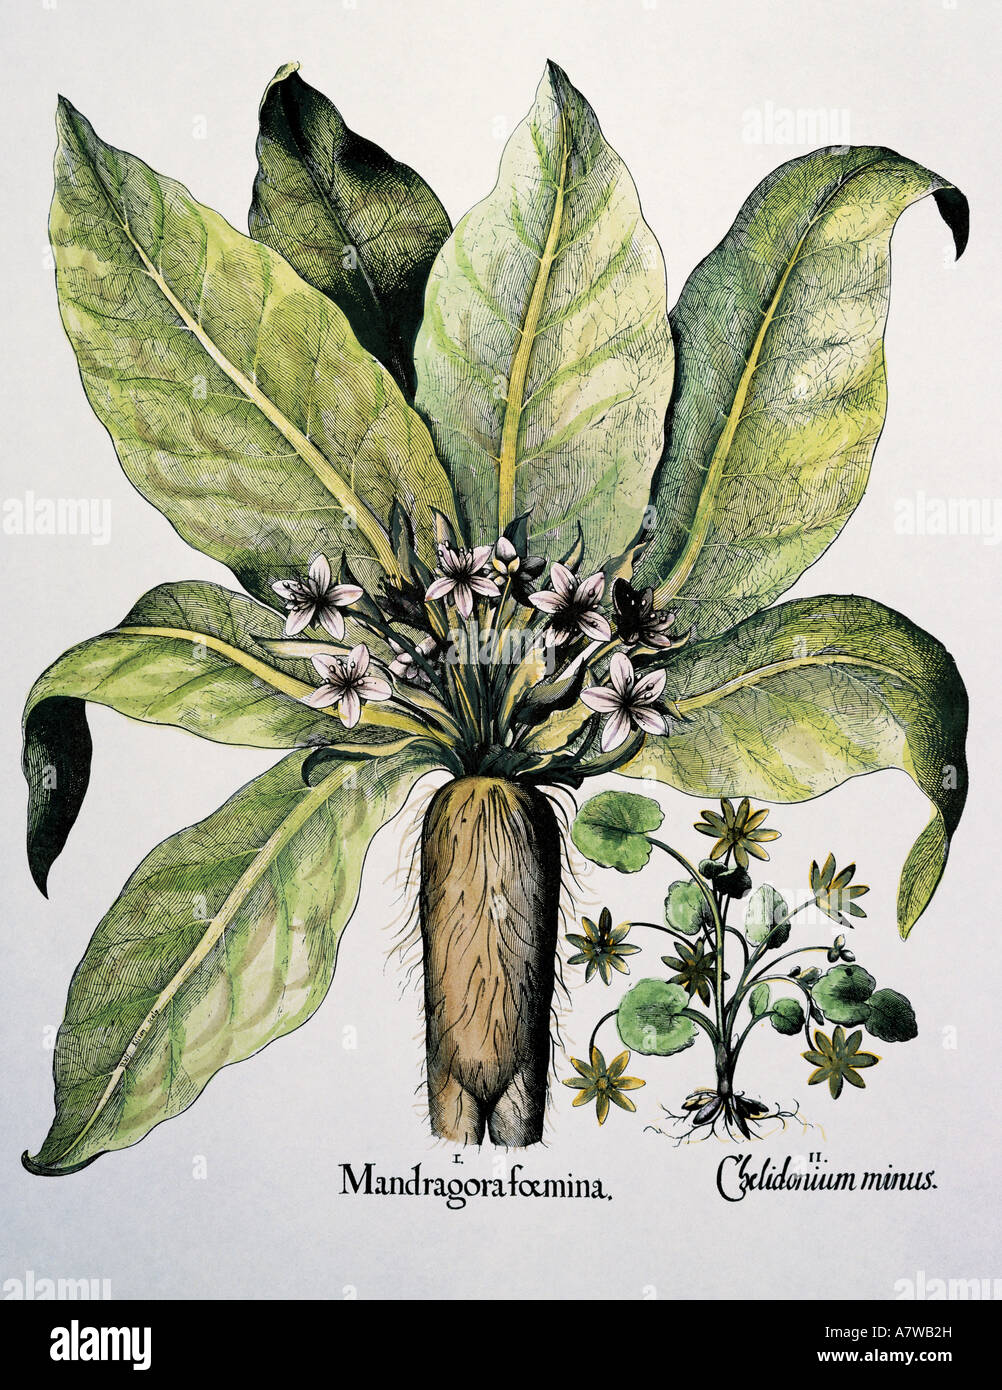 botany, Autumn Mandrake (Mandragora autumnalis), plant, leafs and blossoms, besides celandine (Chelidonium), engraving to 'Hortus Eystettensis' by Basilius Besler, Nuremberg, 1613, private collection, , Artist's Copyright has not to be cleared Stock Photo